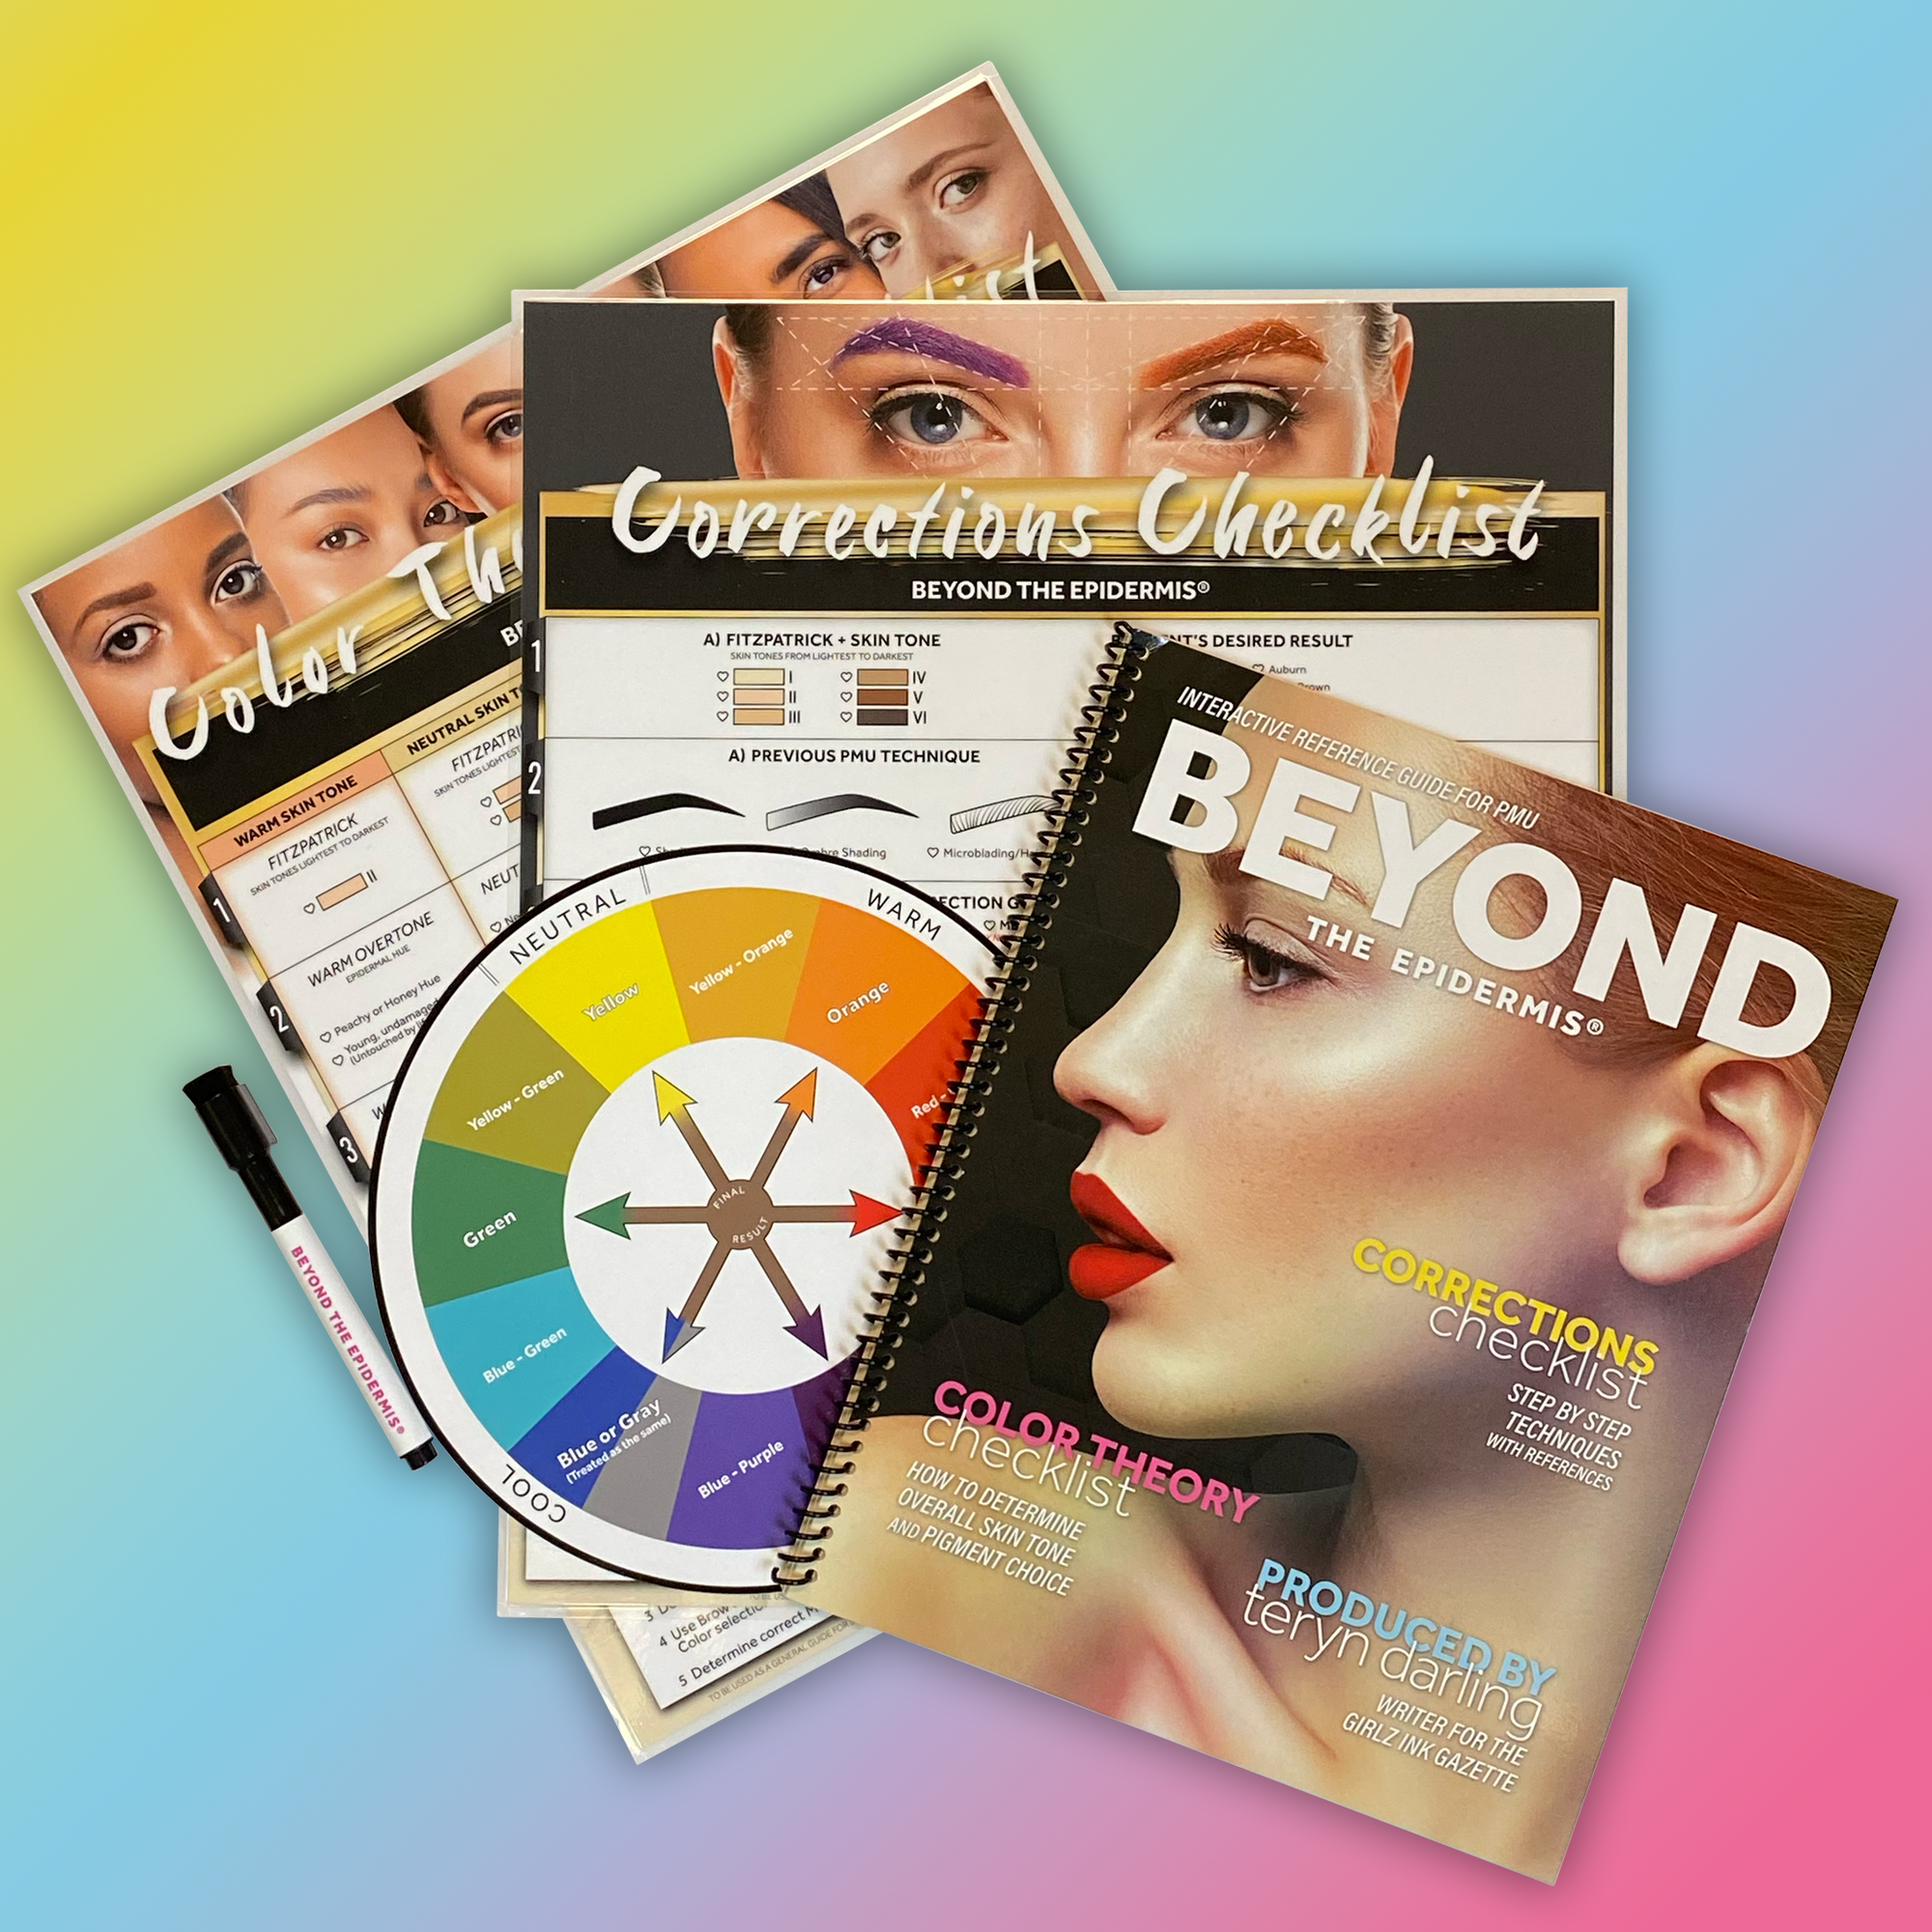 Beyond the Epidermis™ Interactive Reference Guide & Checklists